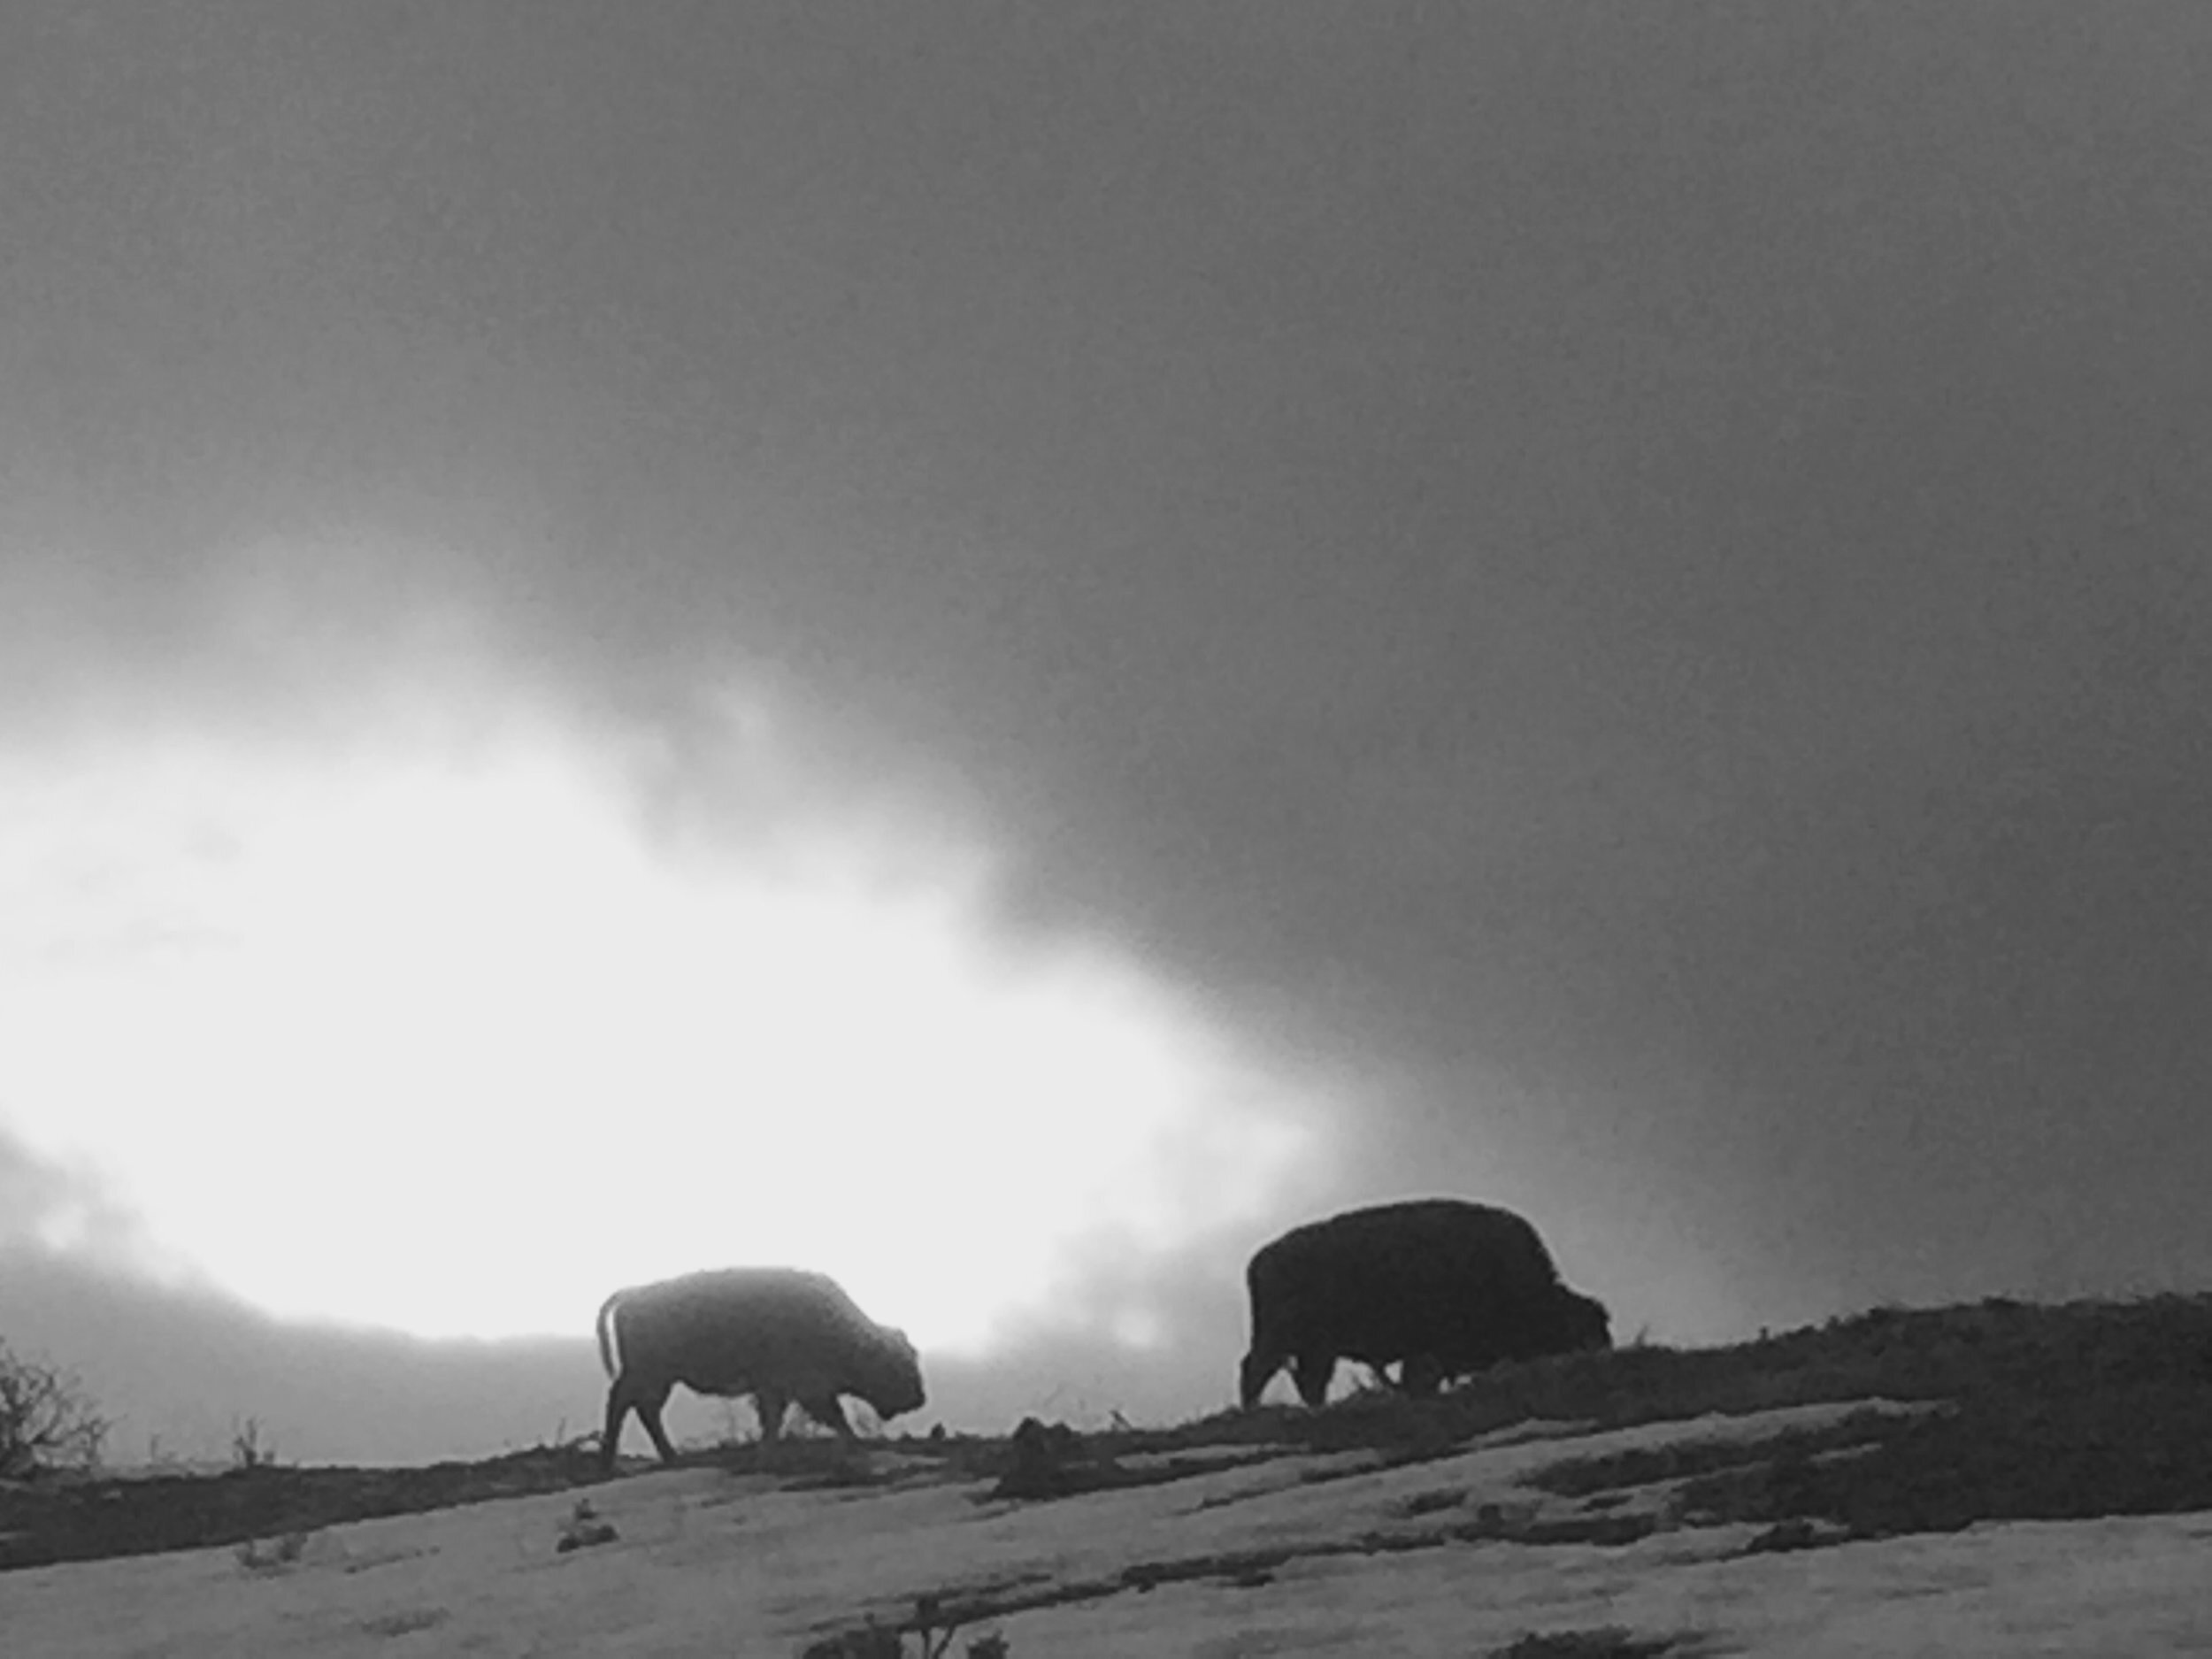 BISON FREE TO ROAM OUTSIDE OF YELLOWSTONE | NPR'S All Things Considered, 2/4/16